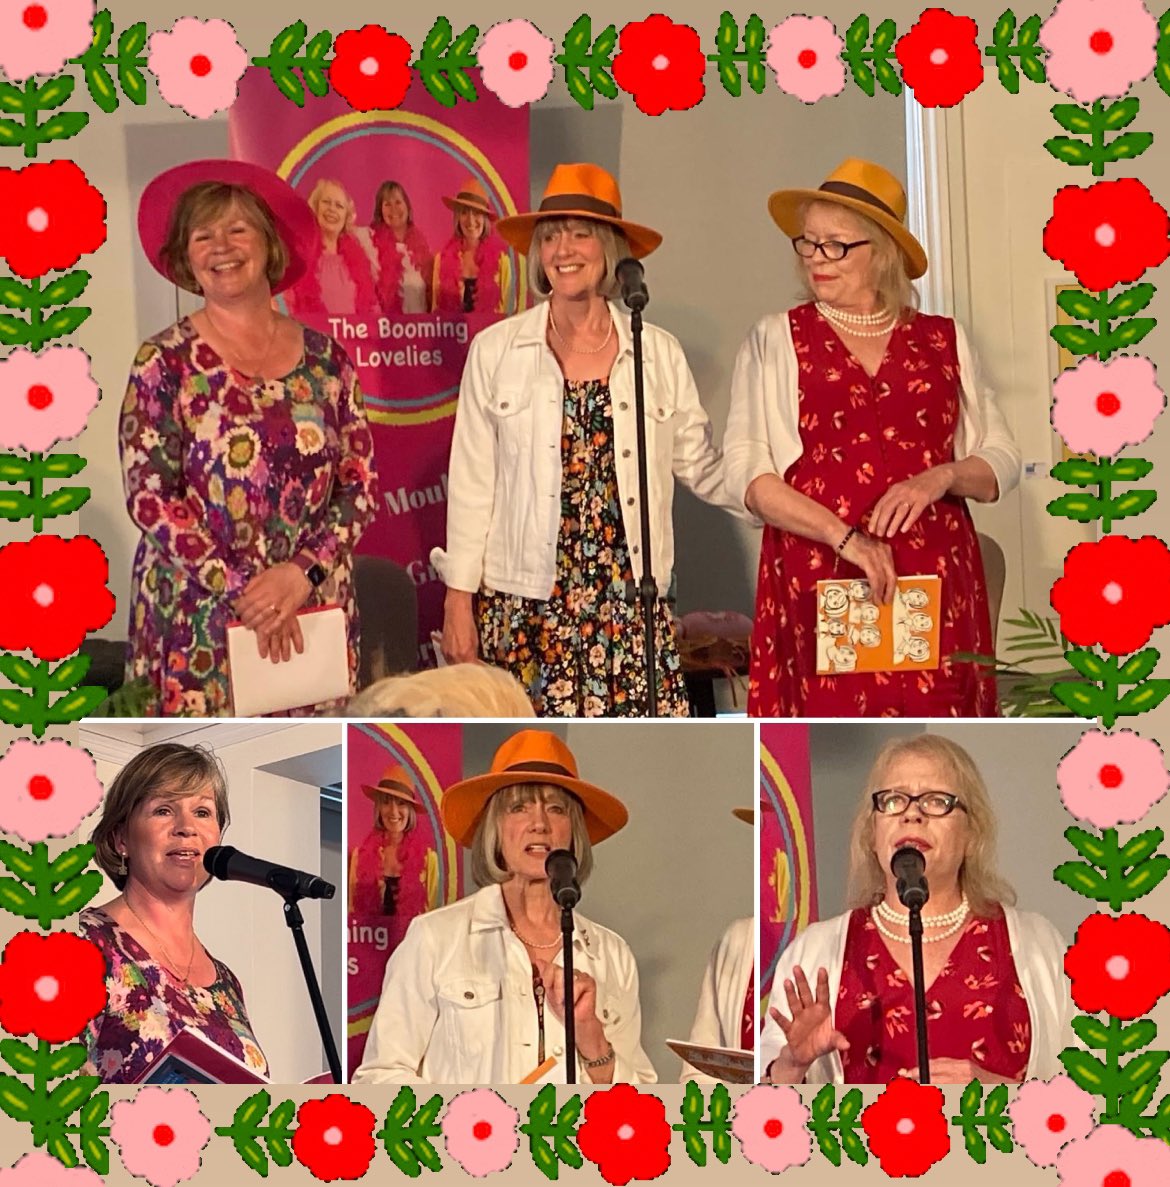 We’re very grateful to the @GuildfordInst for organising our #poetryevent & delicious #afternoontea 🍰 🎉 Thanks so much to our wonderful audience for the warm reception to our #poetryperformance & our #poetrybooks🔥